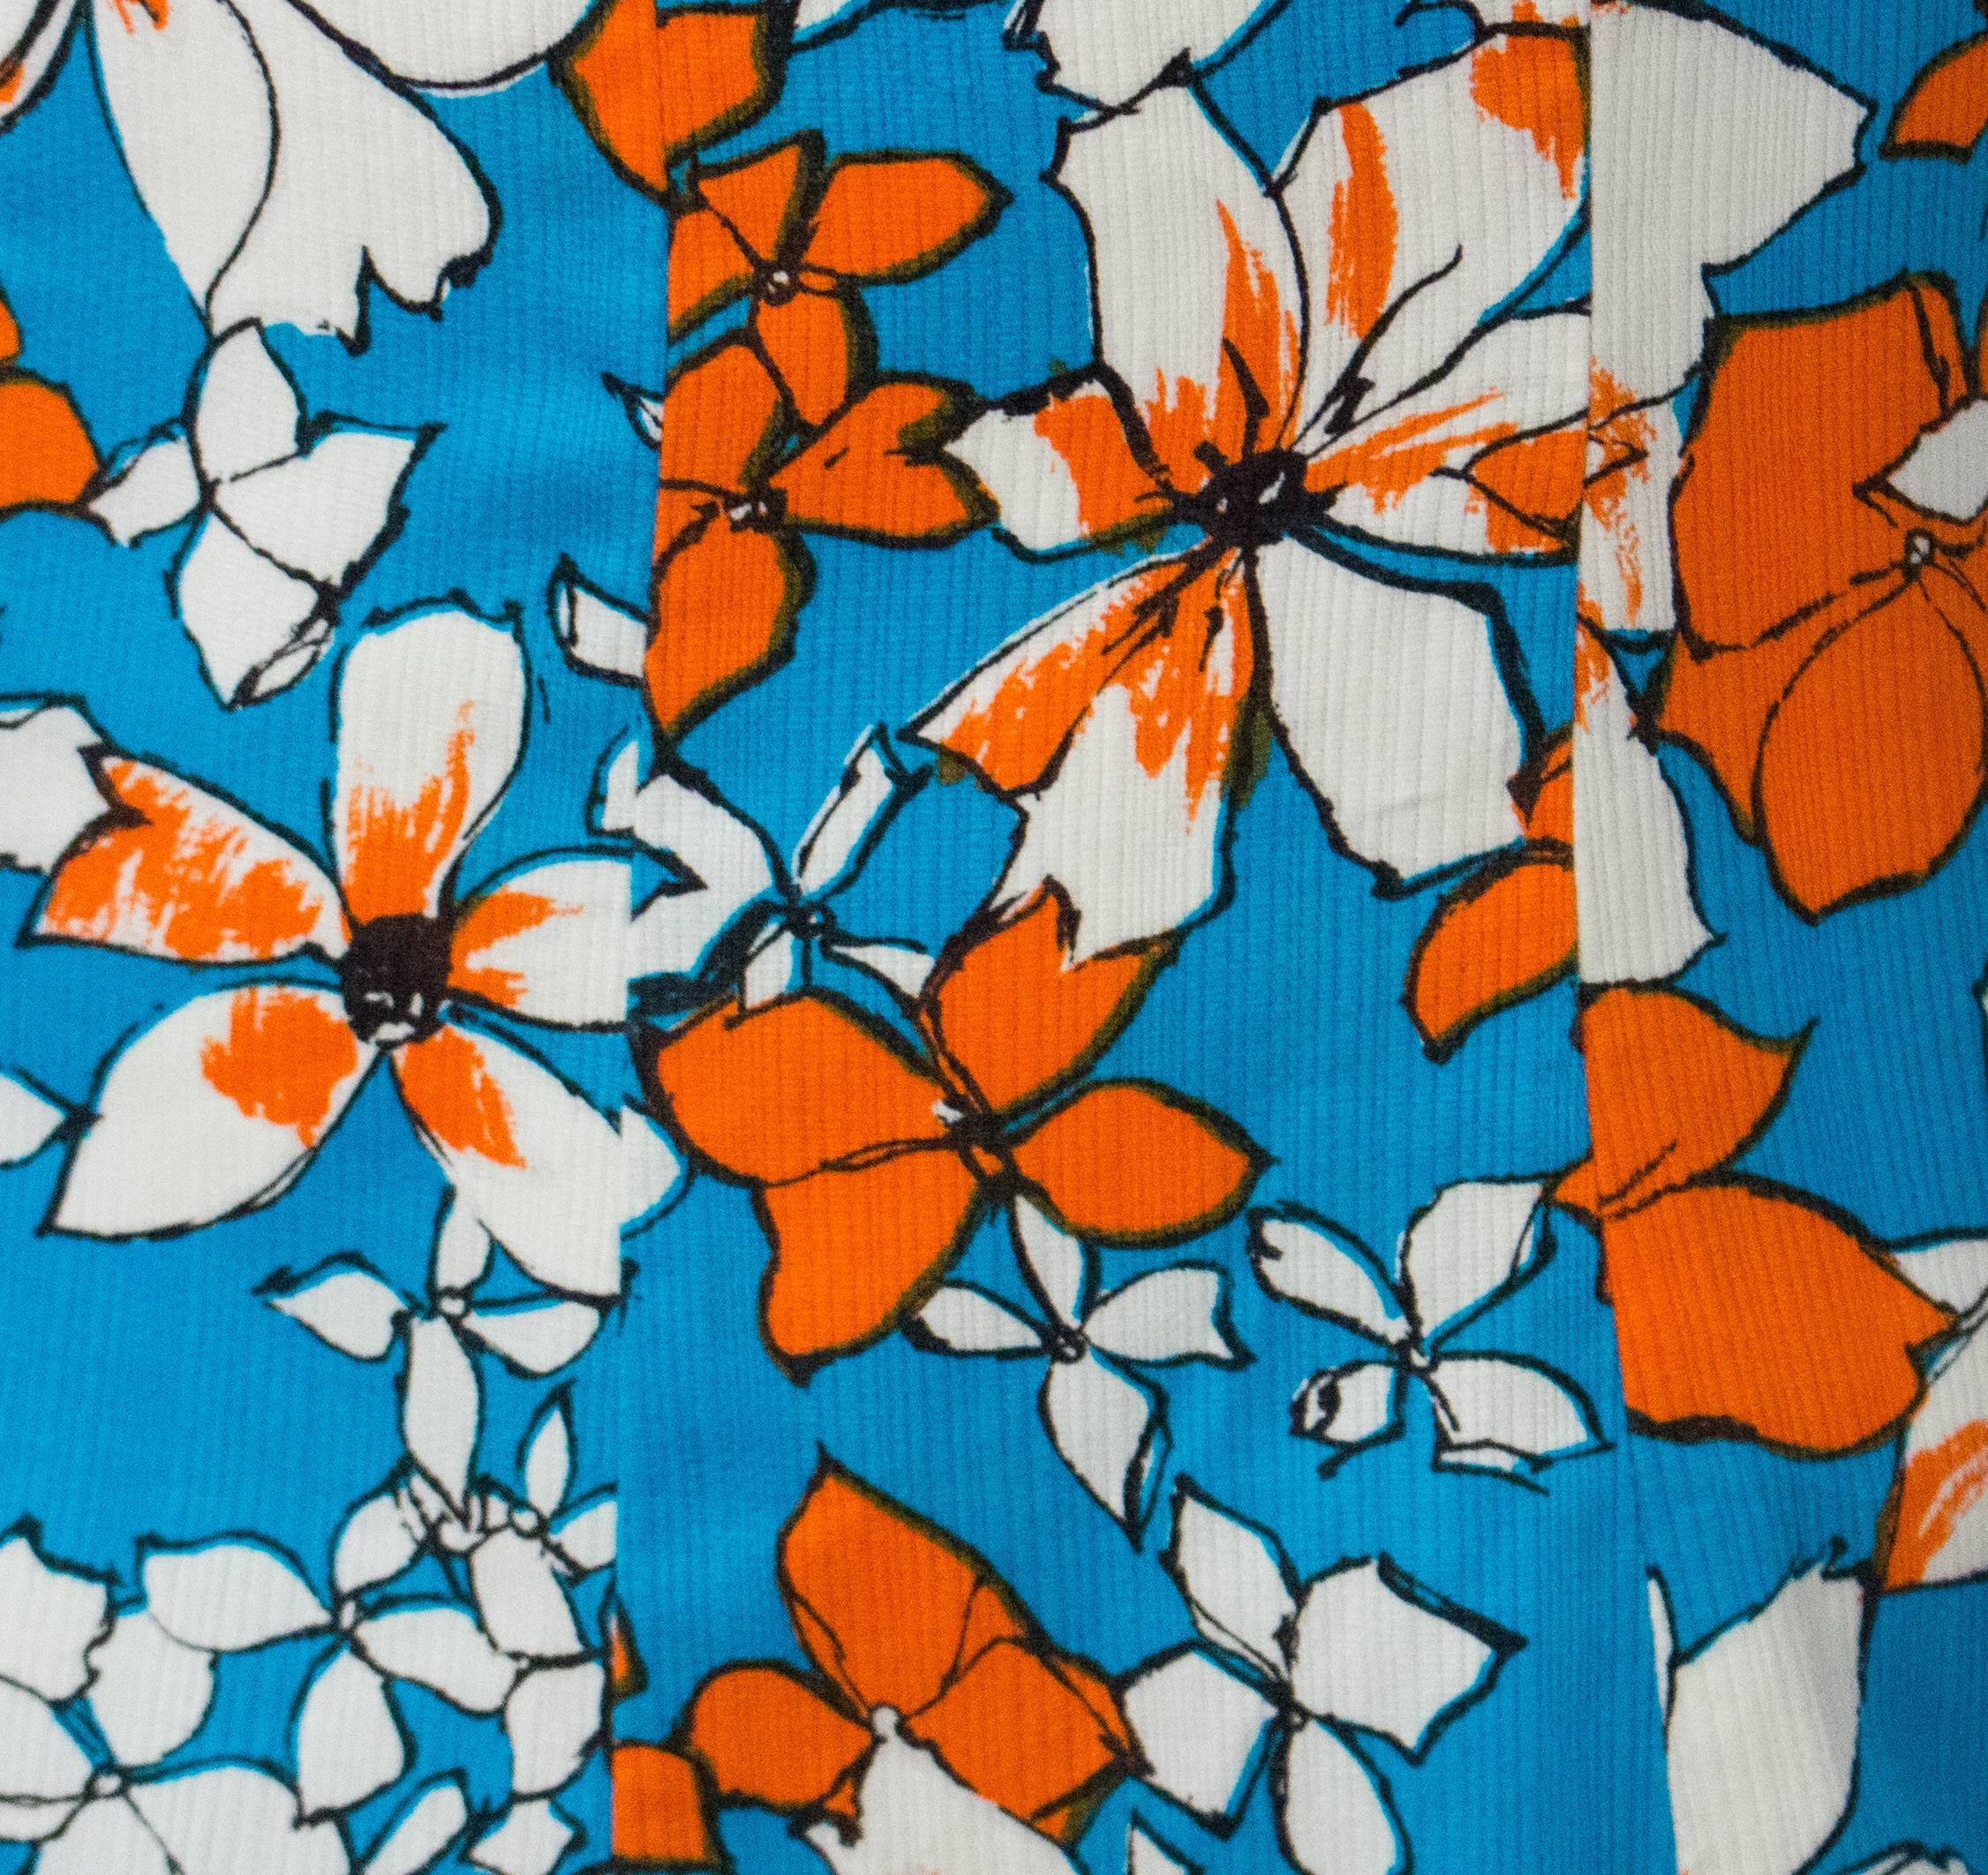 60s Floral Summer Dress. Orange and blue tropical floral print with white contrast collar. 